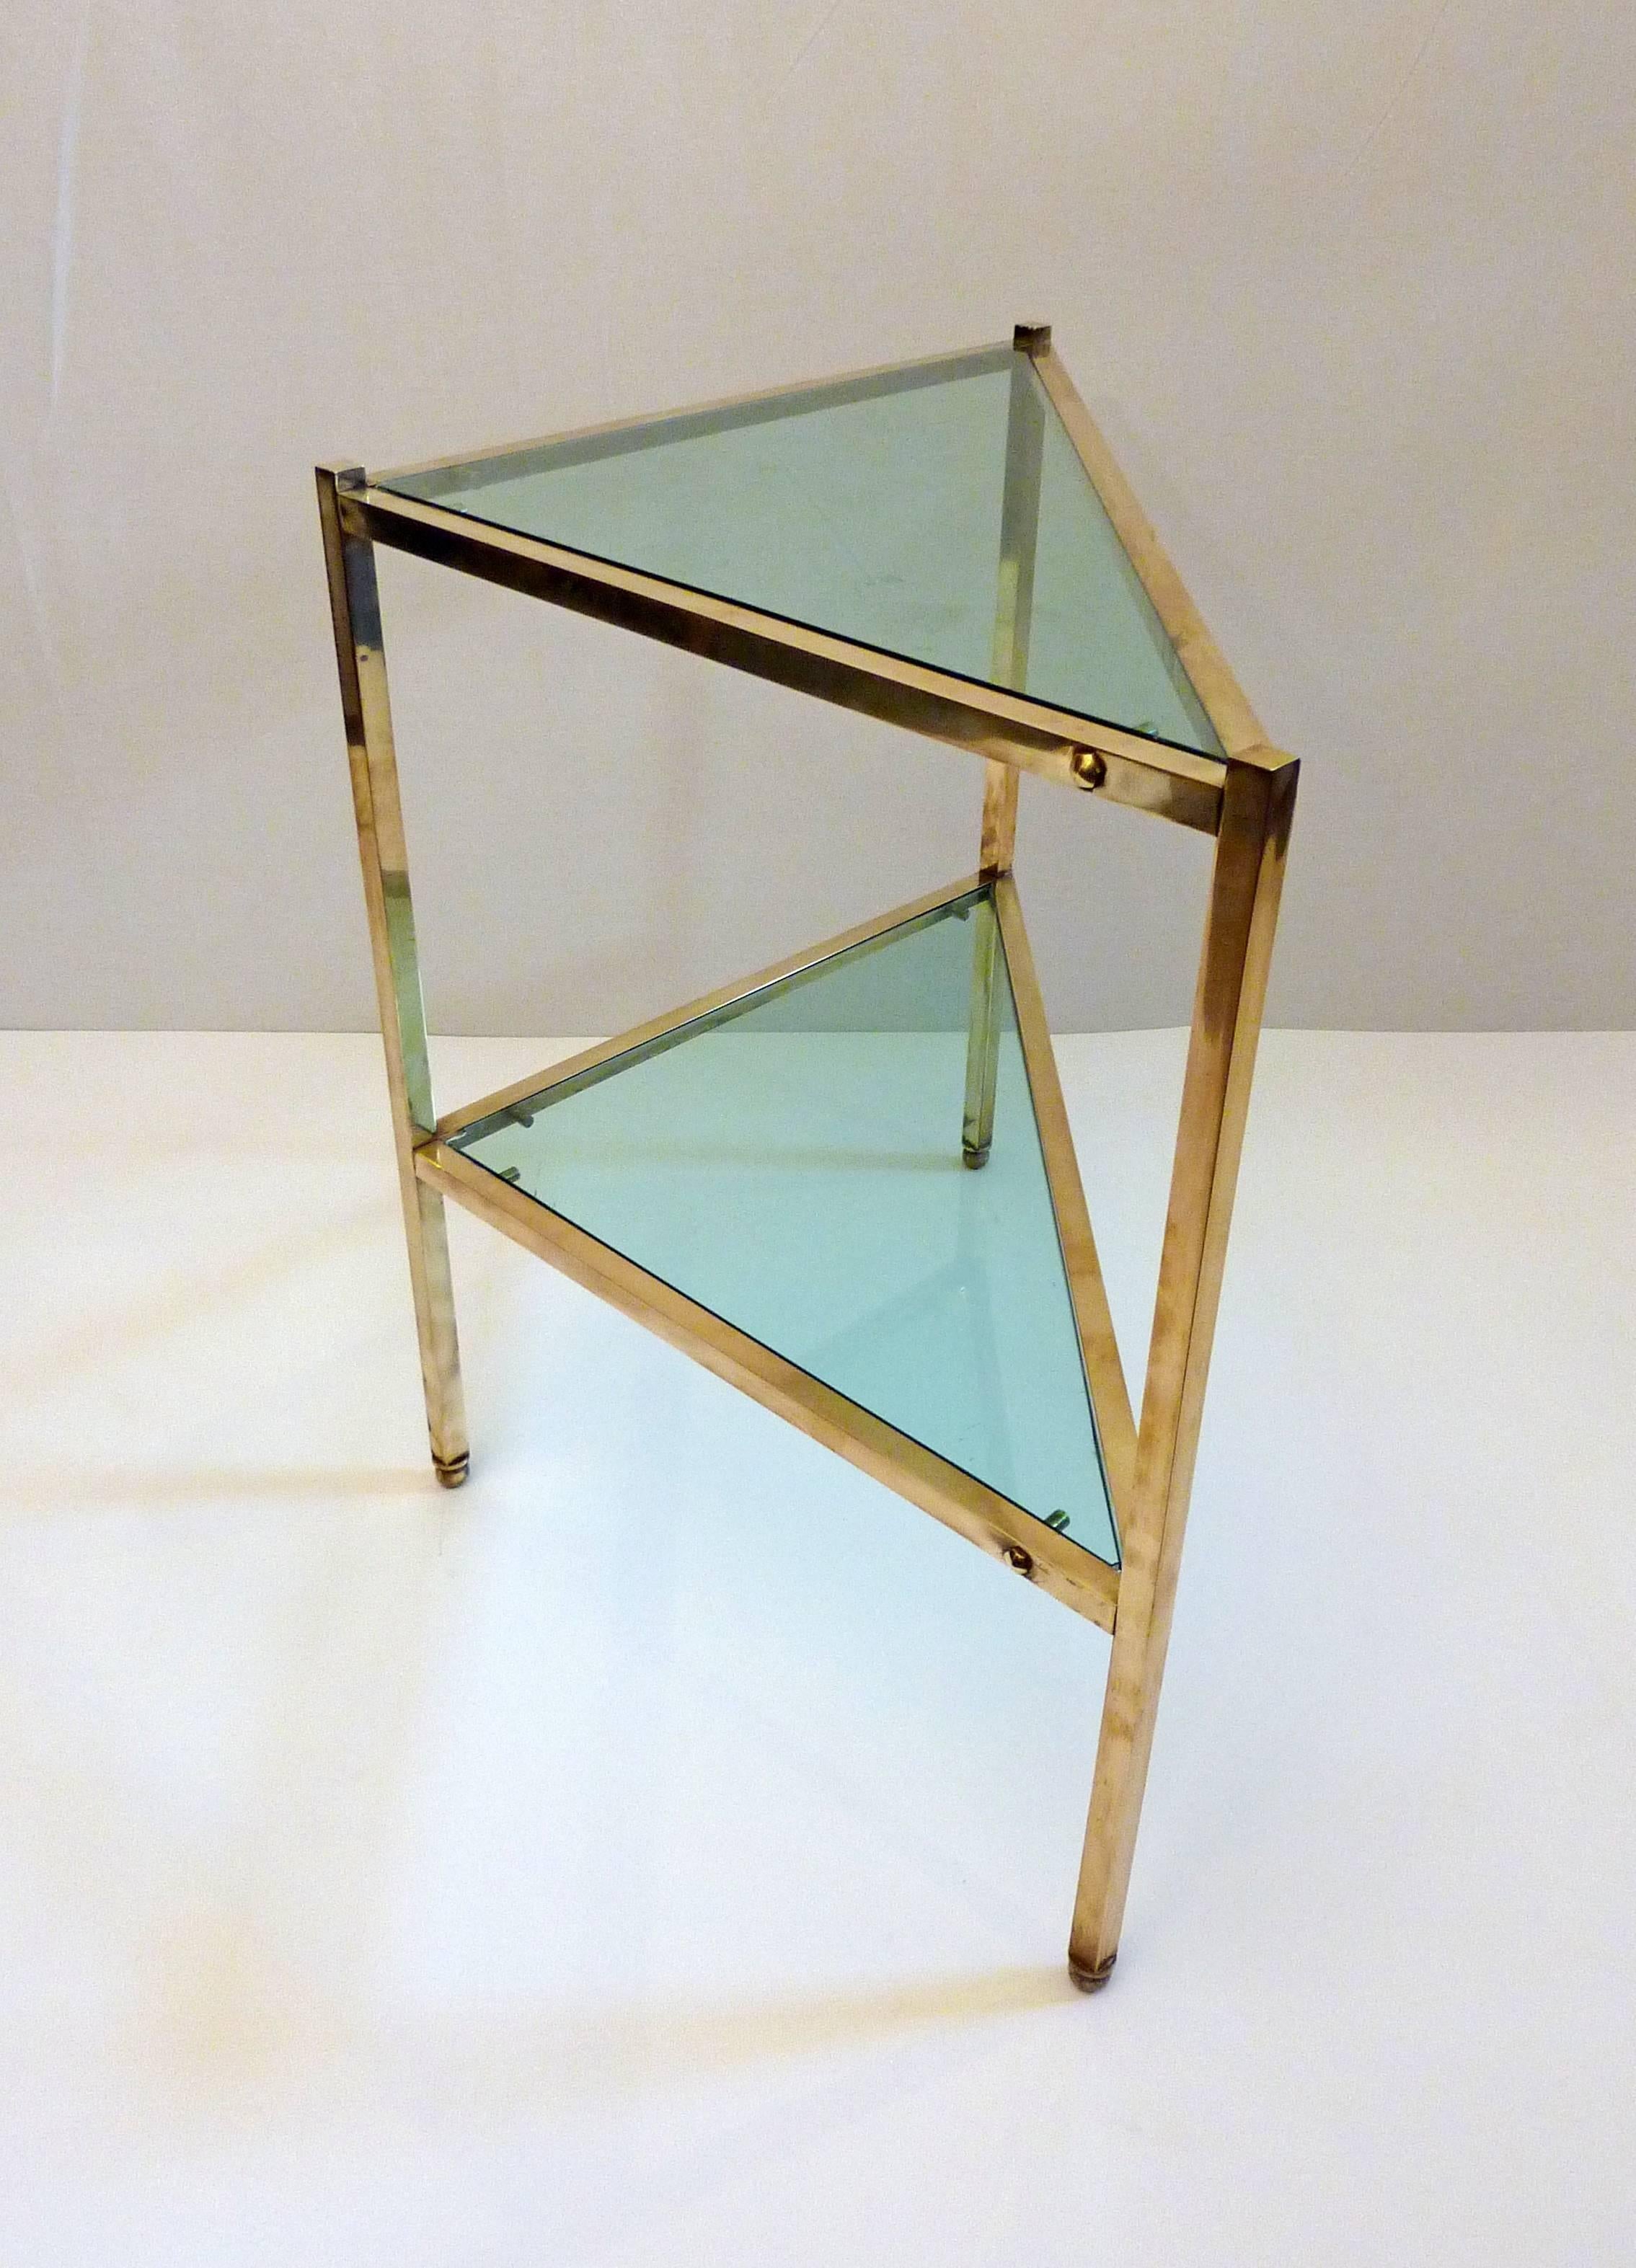 Unusual side table in brass with original glass. Great detailing and composition.